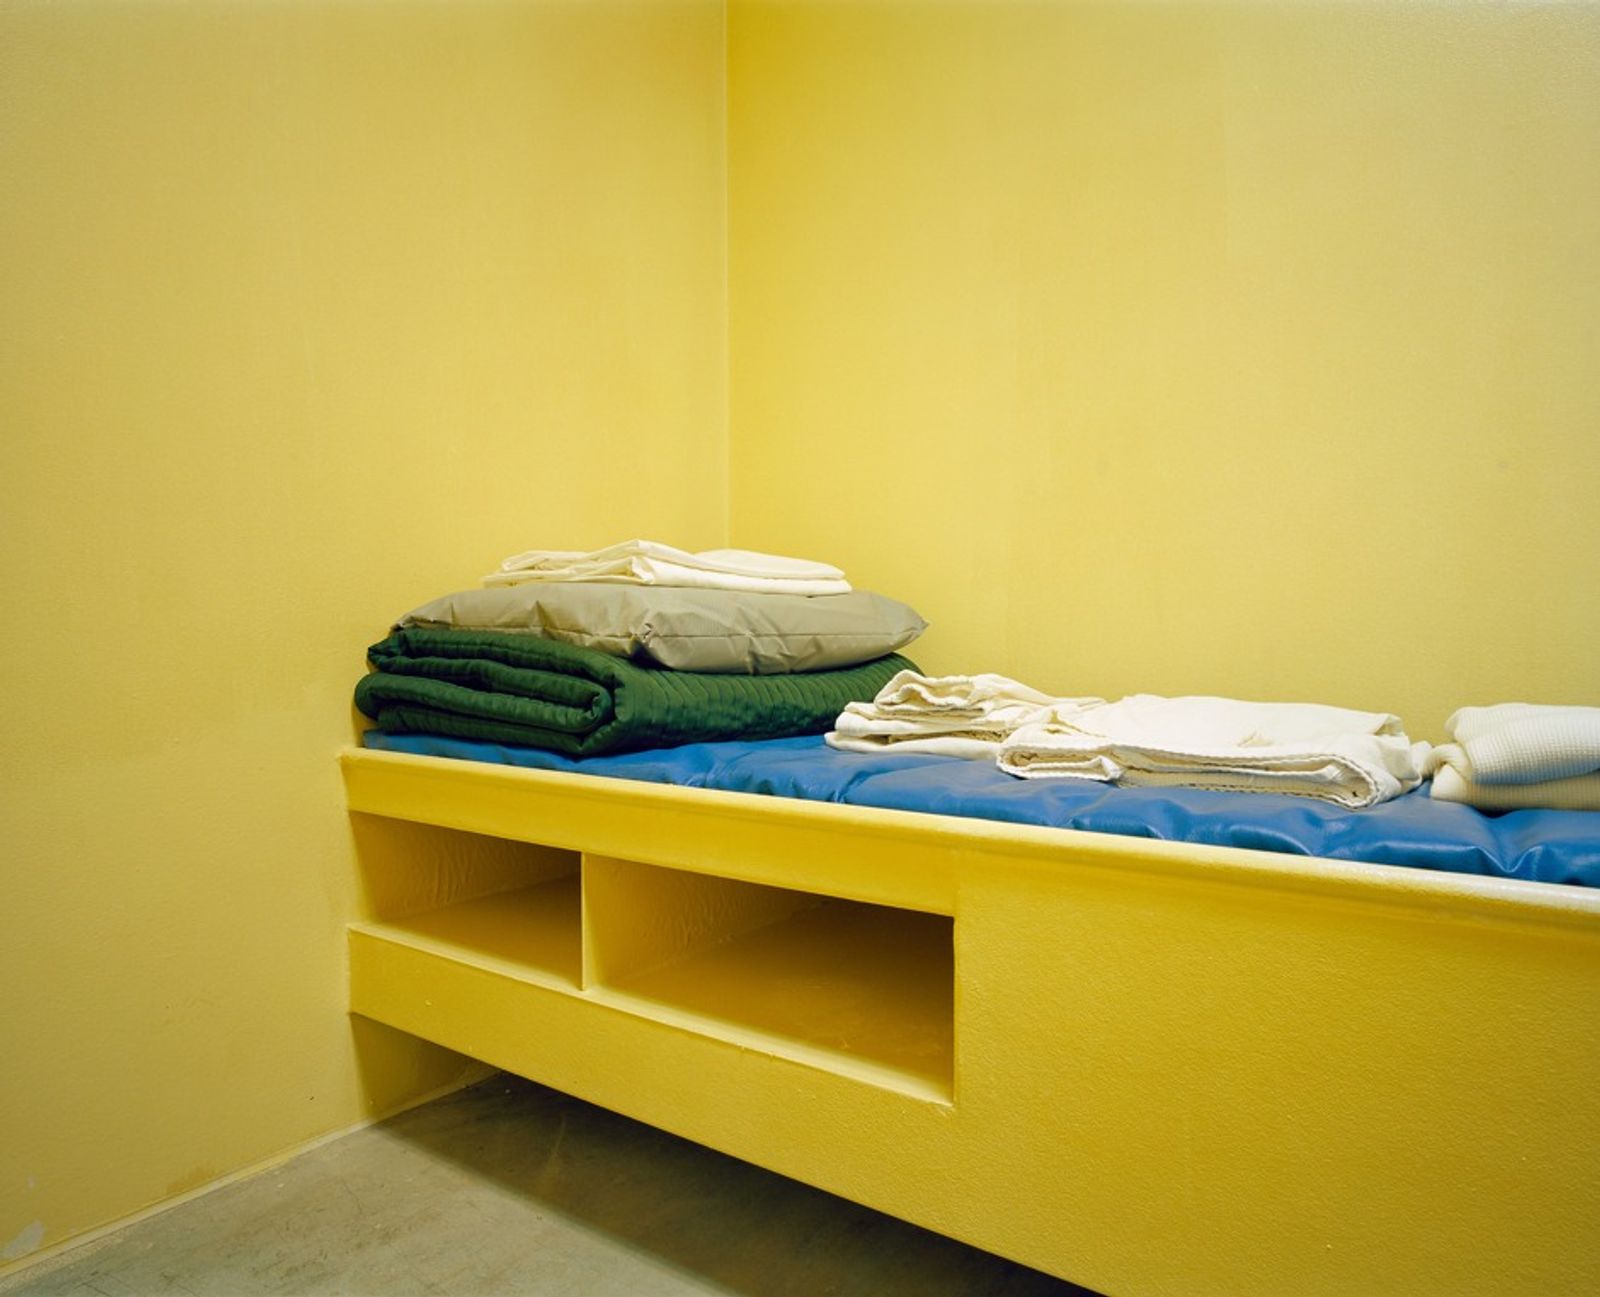 © Debi Cornwall - Image from the Gitmo at Home, Gitmo at Play photography project